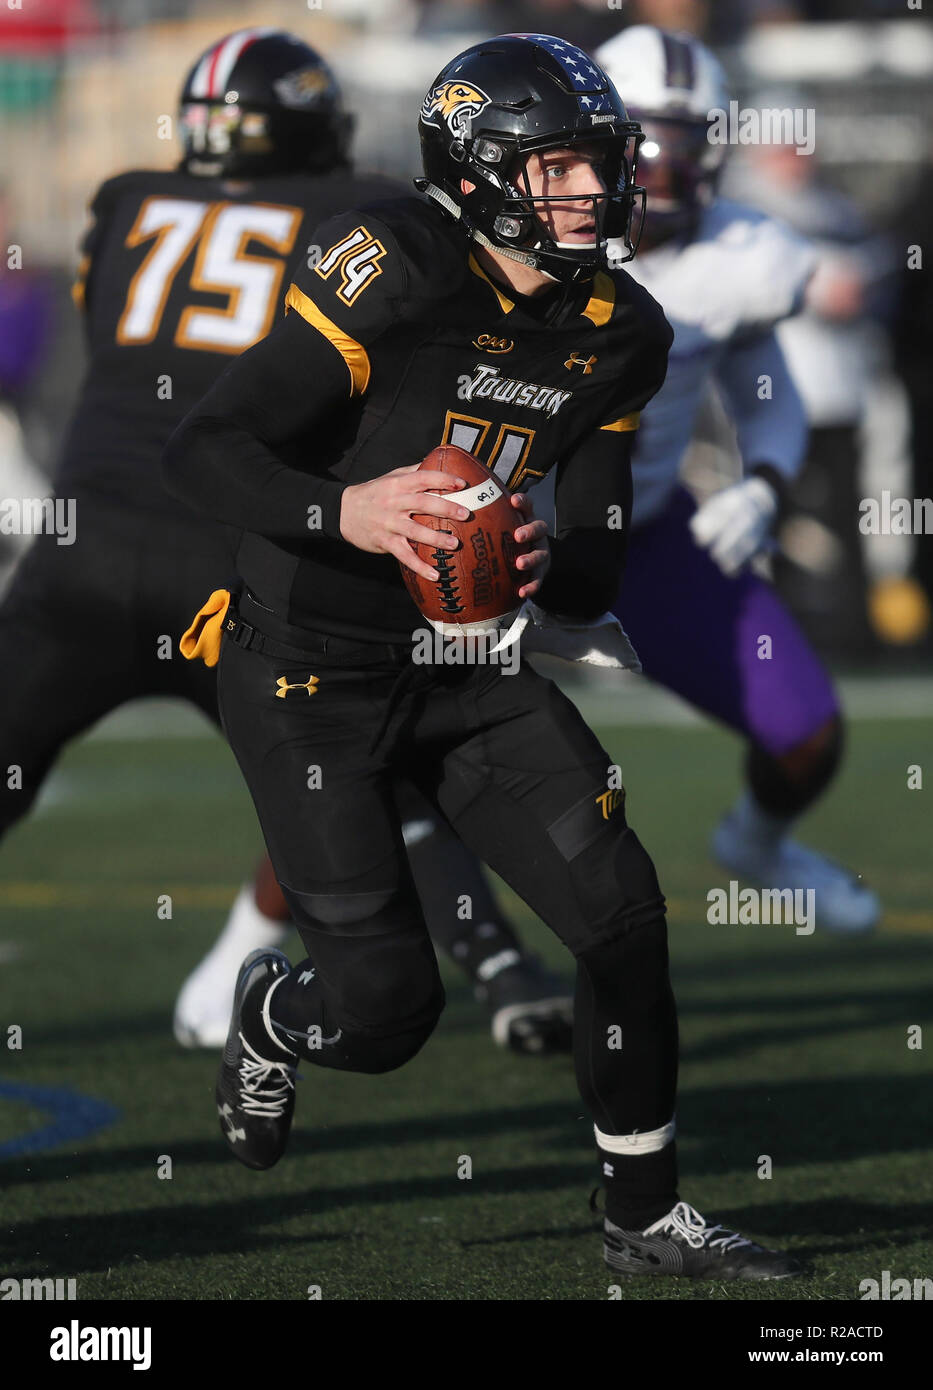 Towson QB Tom Flacco (14) rushes the ball against James Madison in Colonial Athletic Association football action at Unitas Stadium in Towson, MD on November 17, 2018. The James Madison Dukes defeated the Towson Tigers 38-17. Photo/ Mike Buscher/ Cal Sport Media Stock Photo